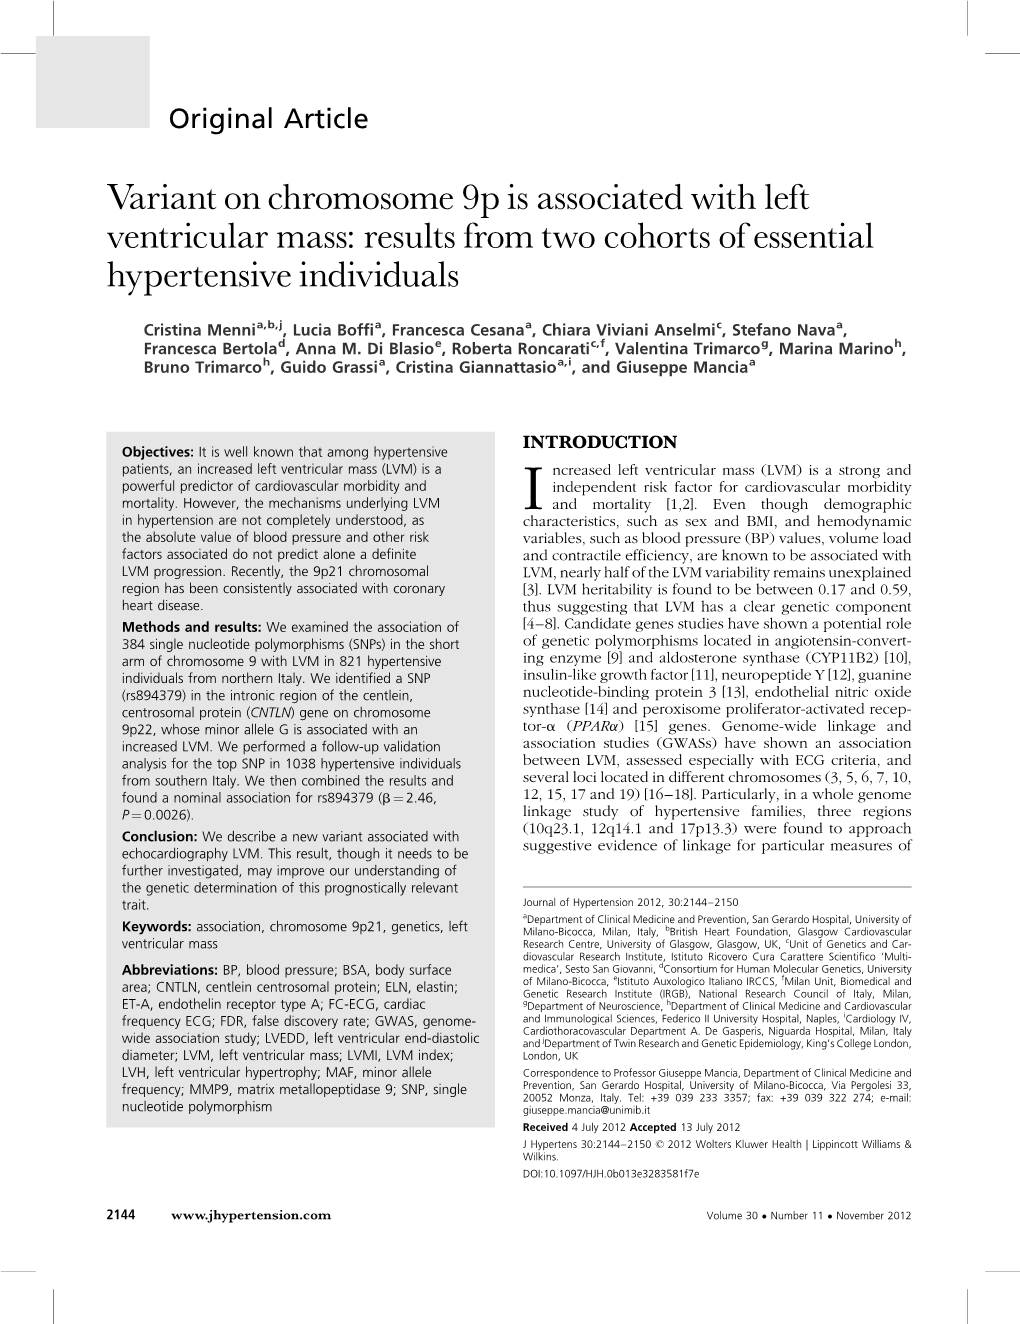 Variant on Chromosome 9P Is Associated with Left Ventricular Mass: Results from Two Cohorts of Essential Hypertensive Individuals